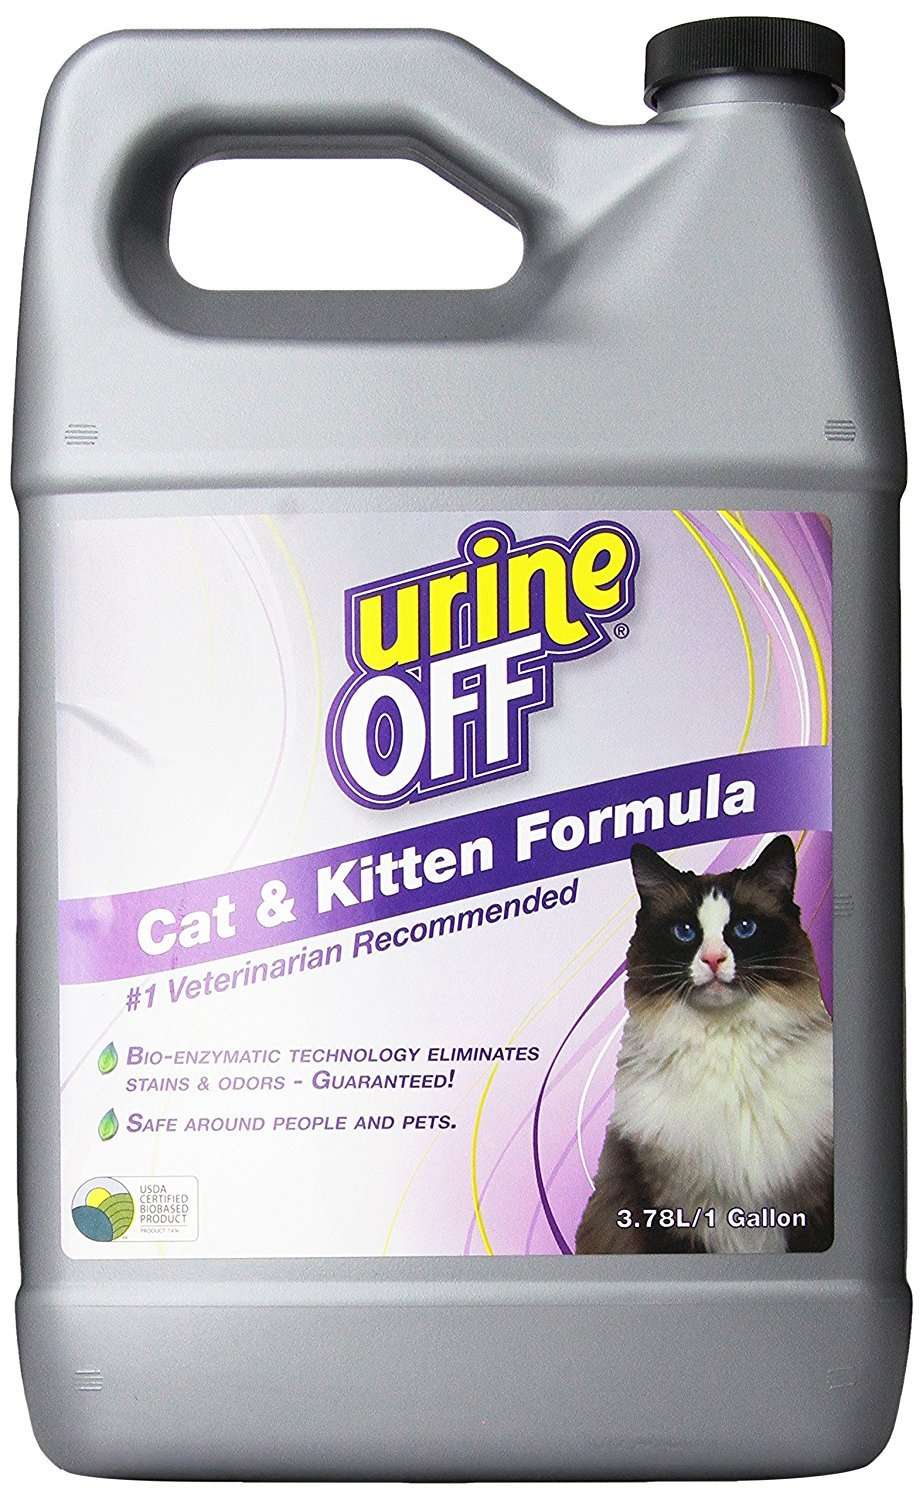 Odor and Stain Remover for Cats, 1 Gallon, Guaranteed to ...